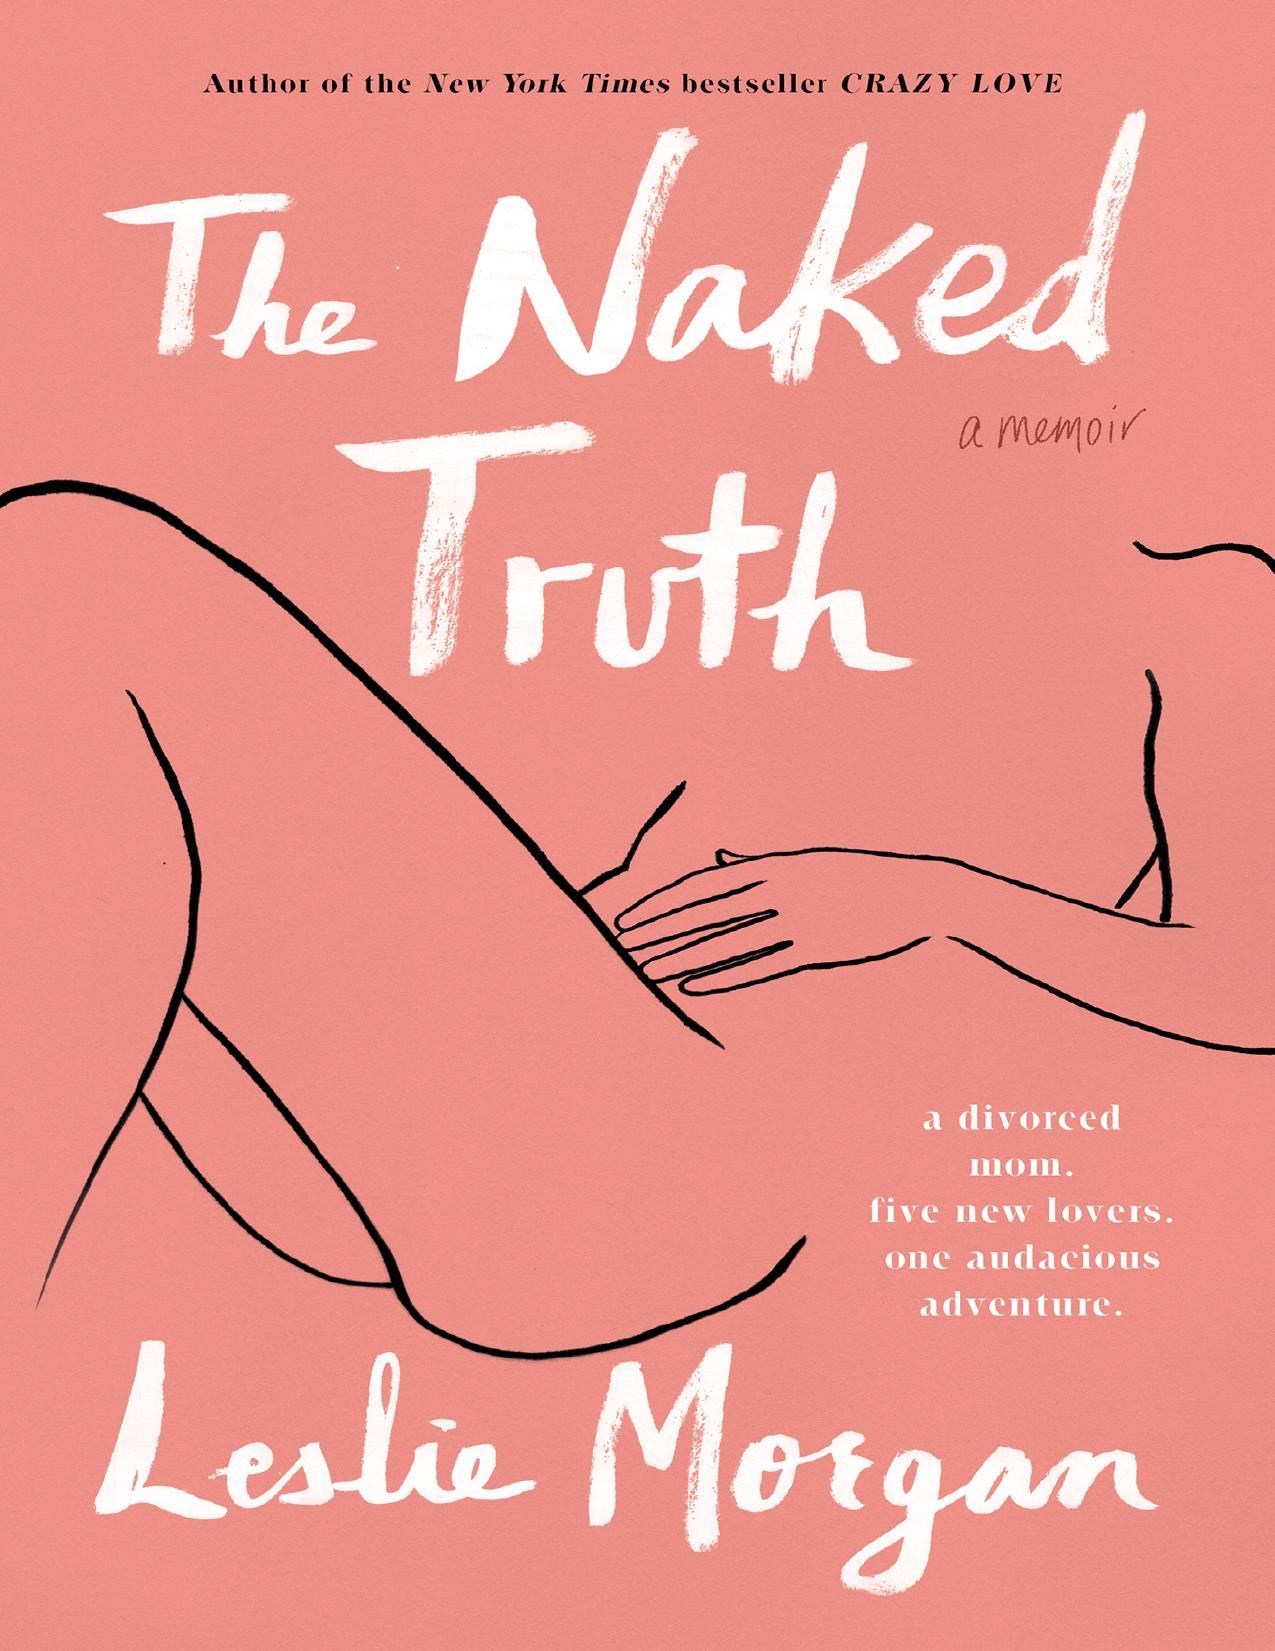 The Naked Truth by Leslie Morgan